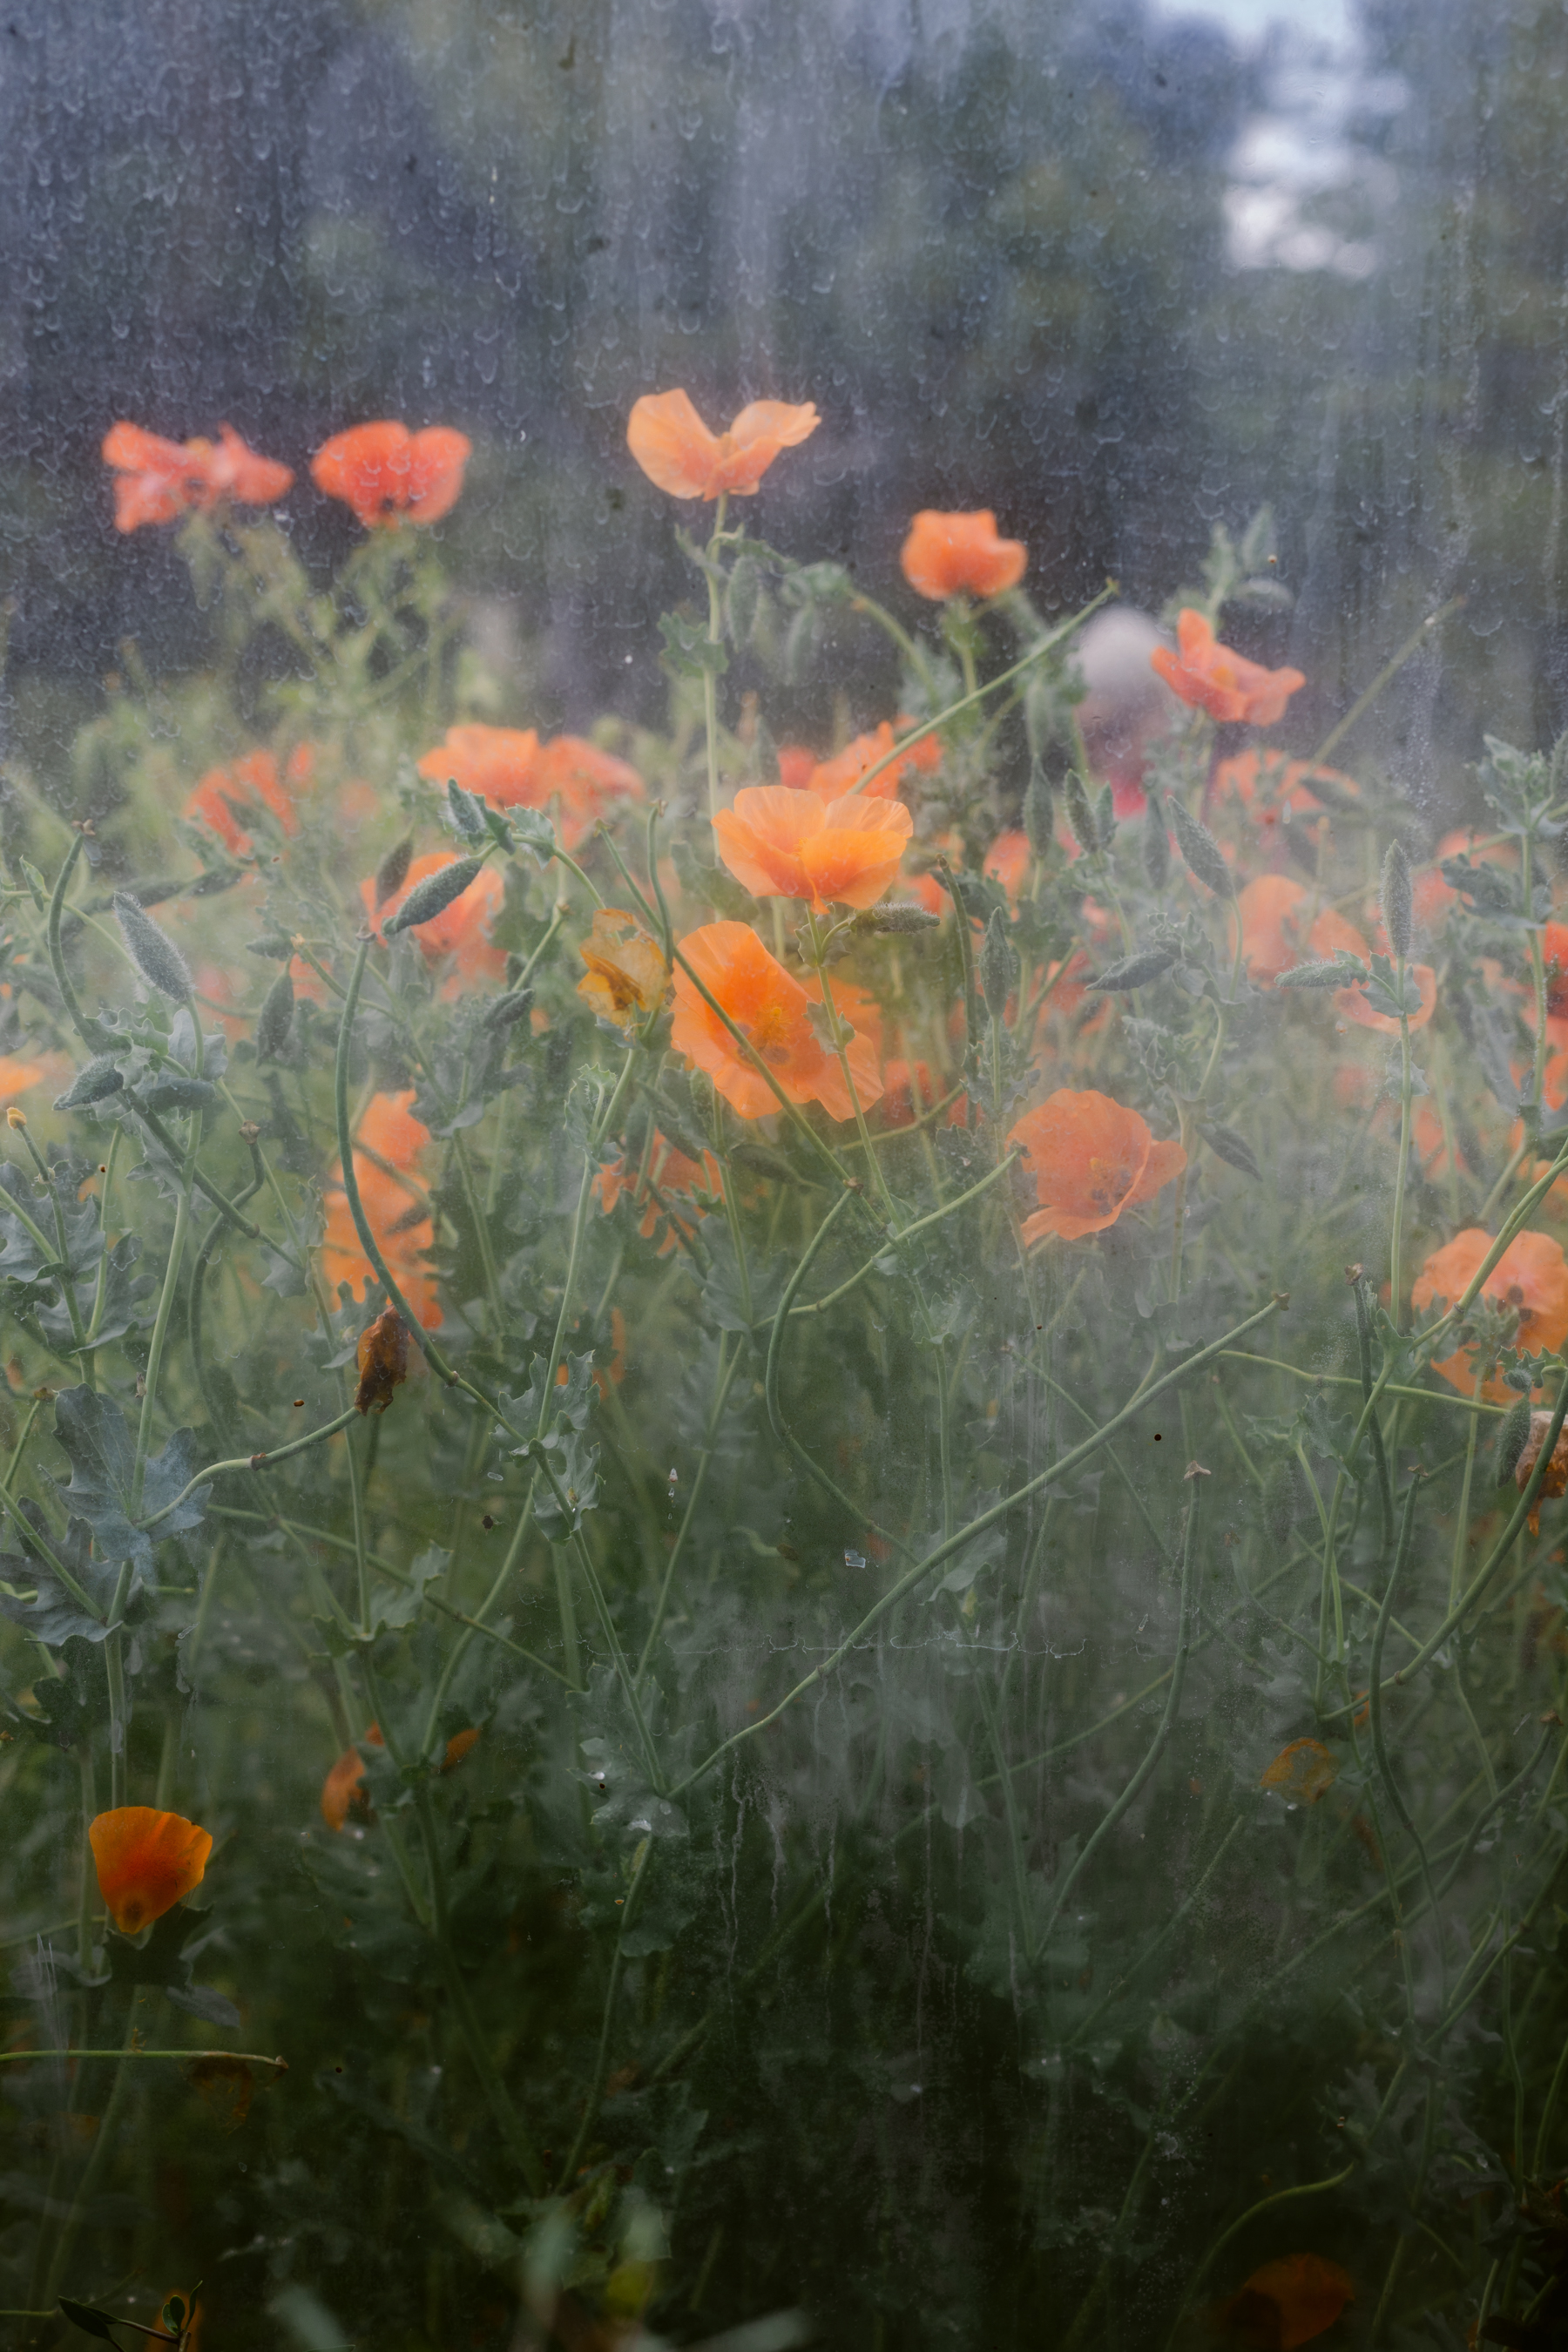 Orange poppies through a greenhouse photographed by Floral Photographer Brenda Landrum.